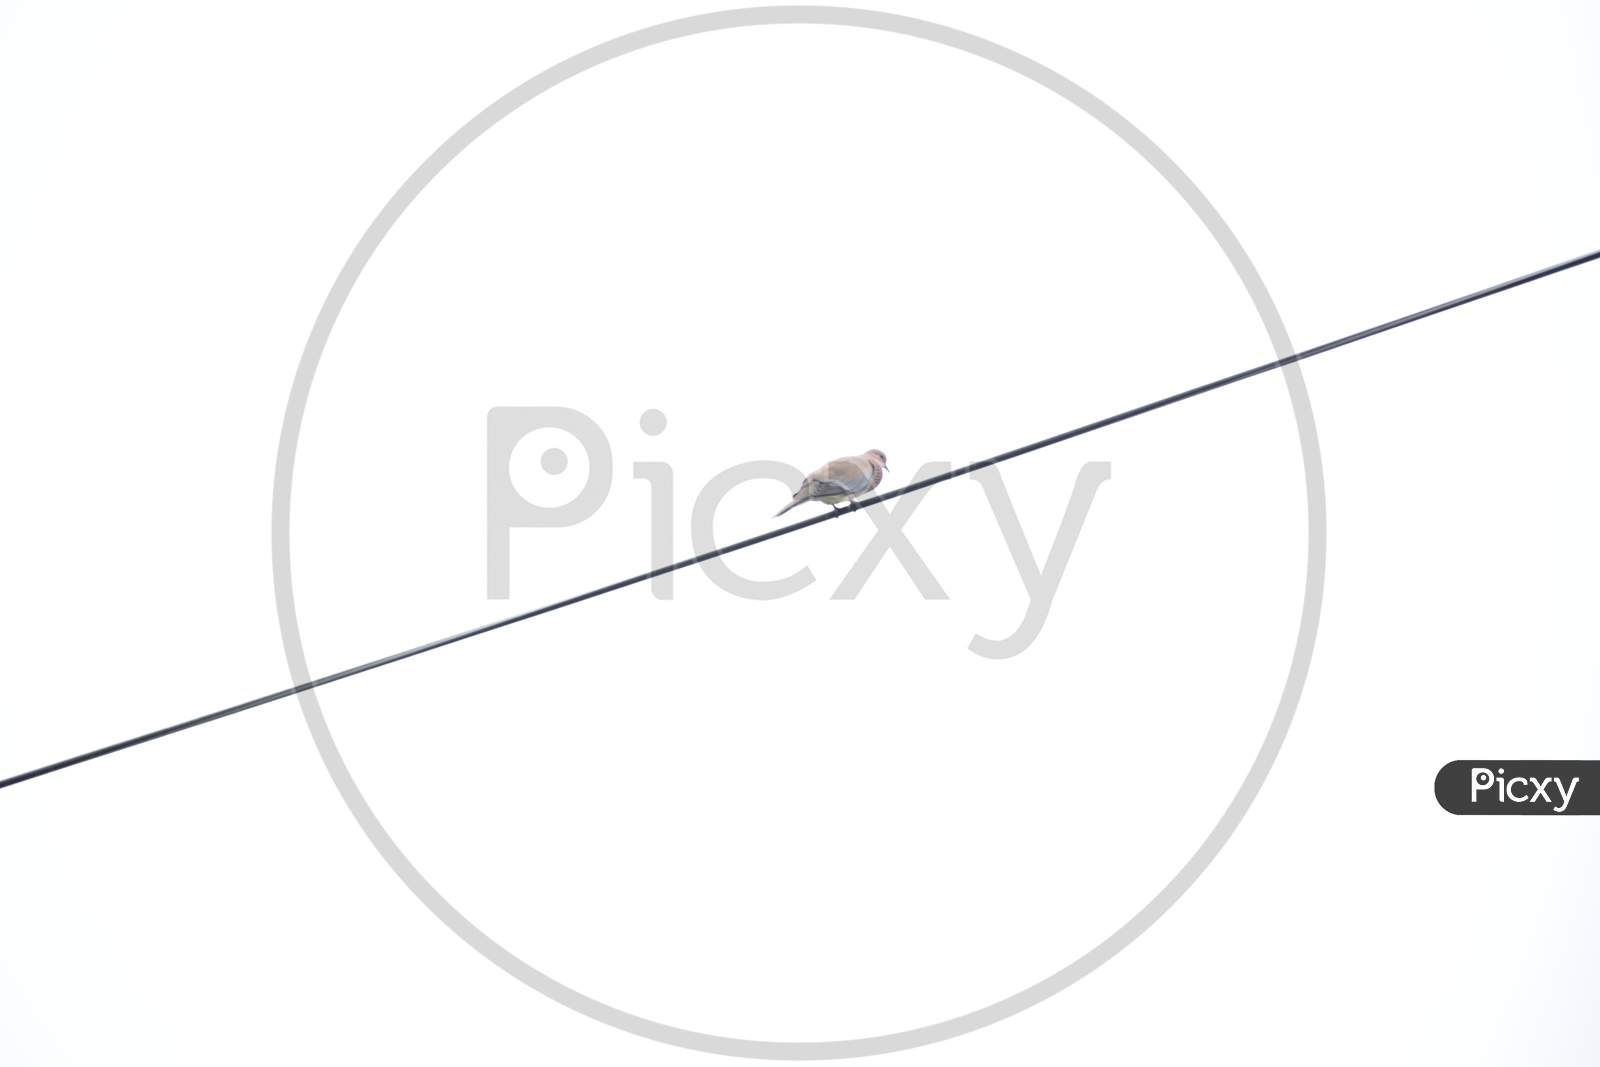 Bird sitting on wire isolated in white background